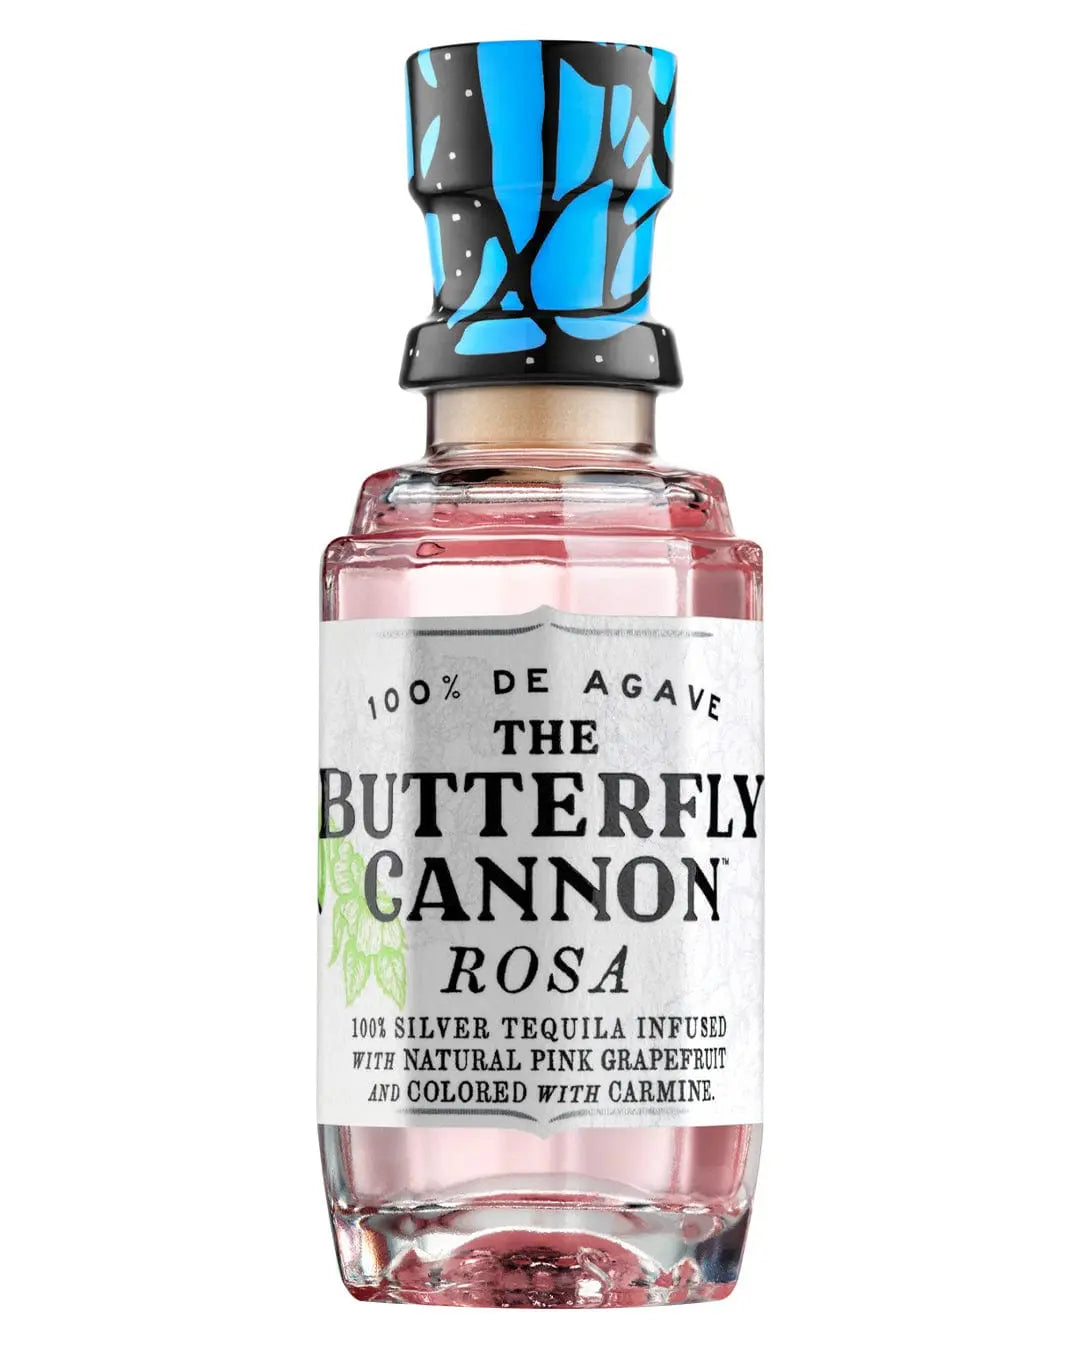 The Butterfly Cannon Rosa Tequila Miniature, 5 cl Spirit Miniatures